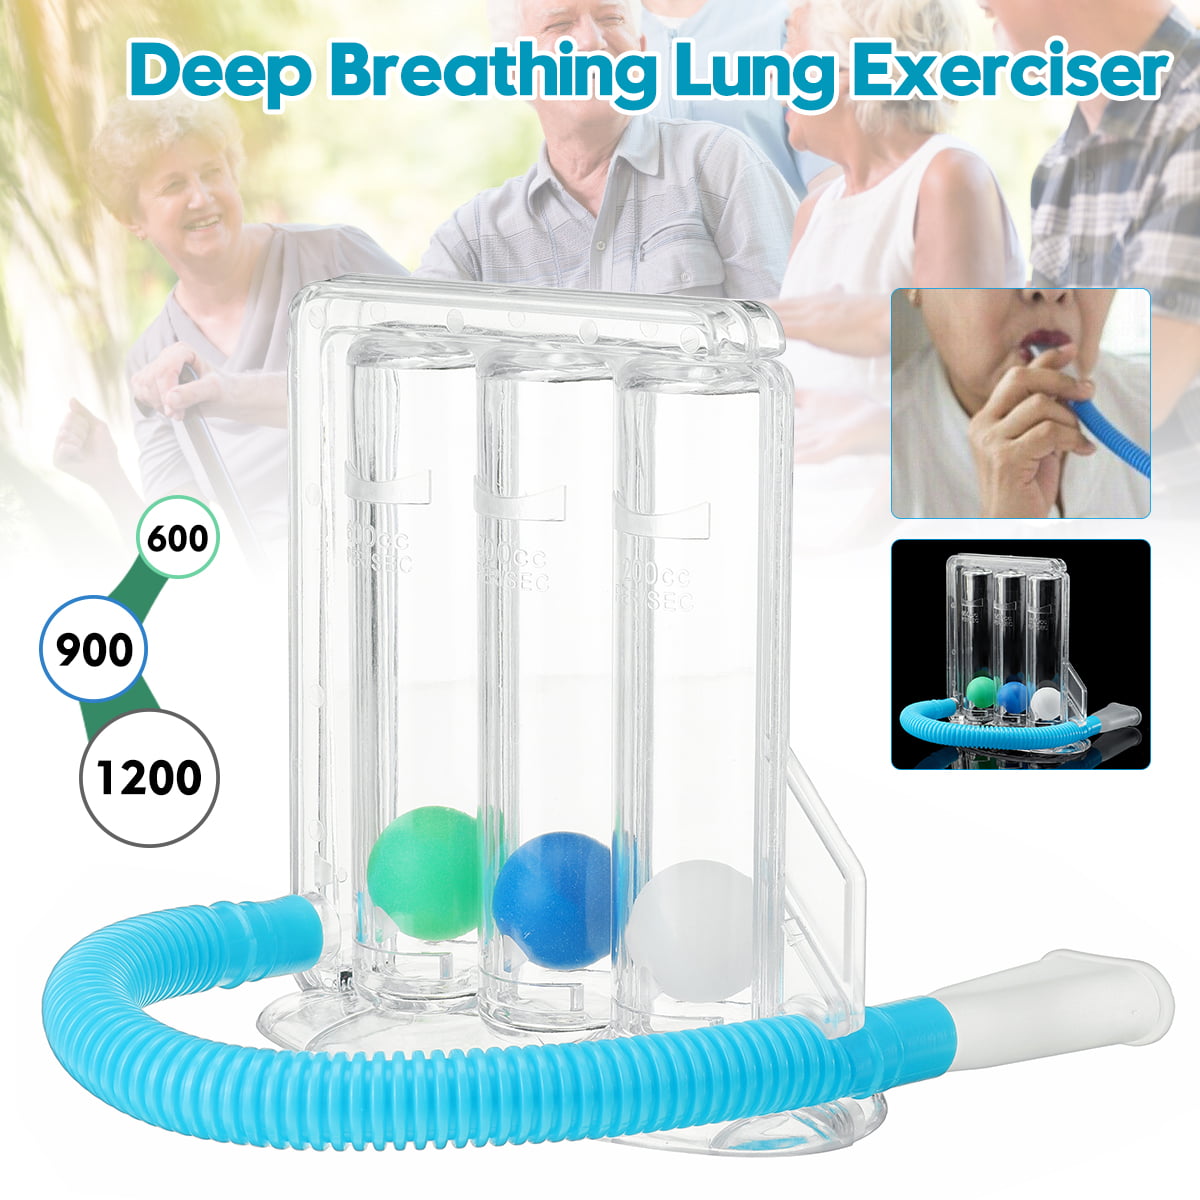 Breathing Trainer, Deep Breathing Lung Exerciser Incentive ...